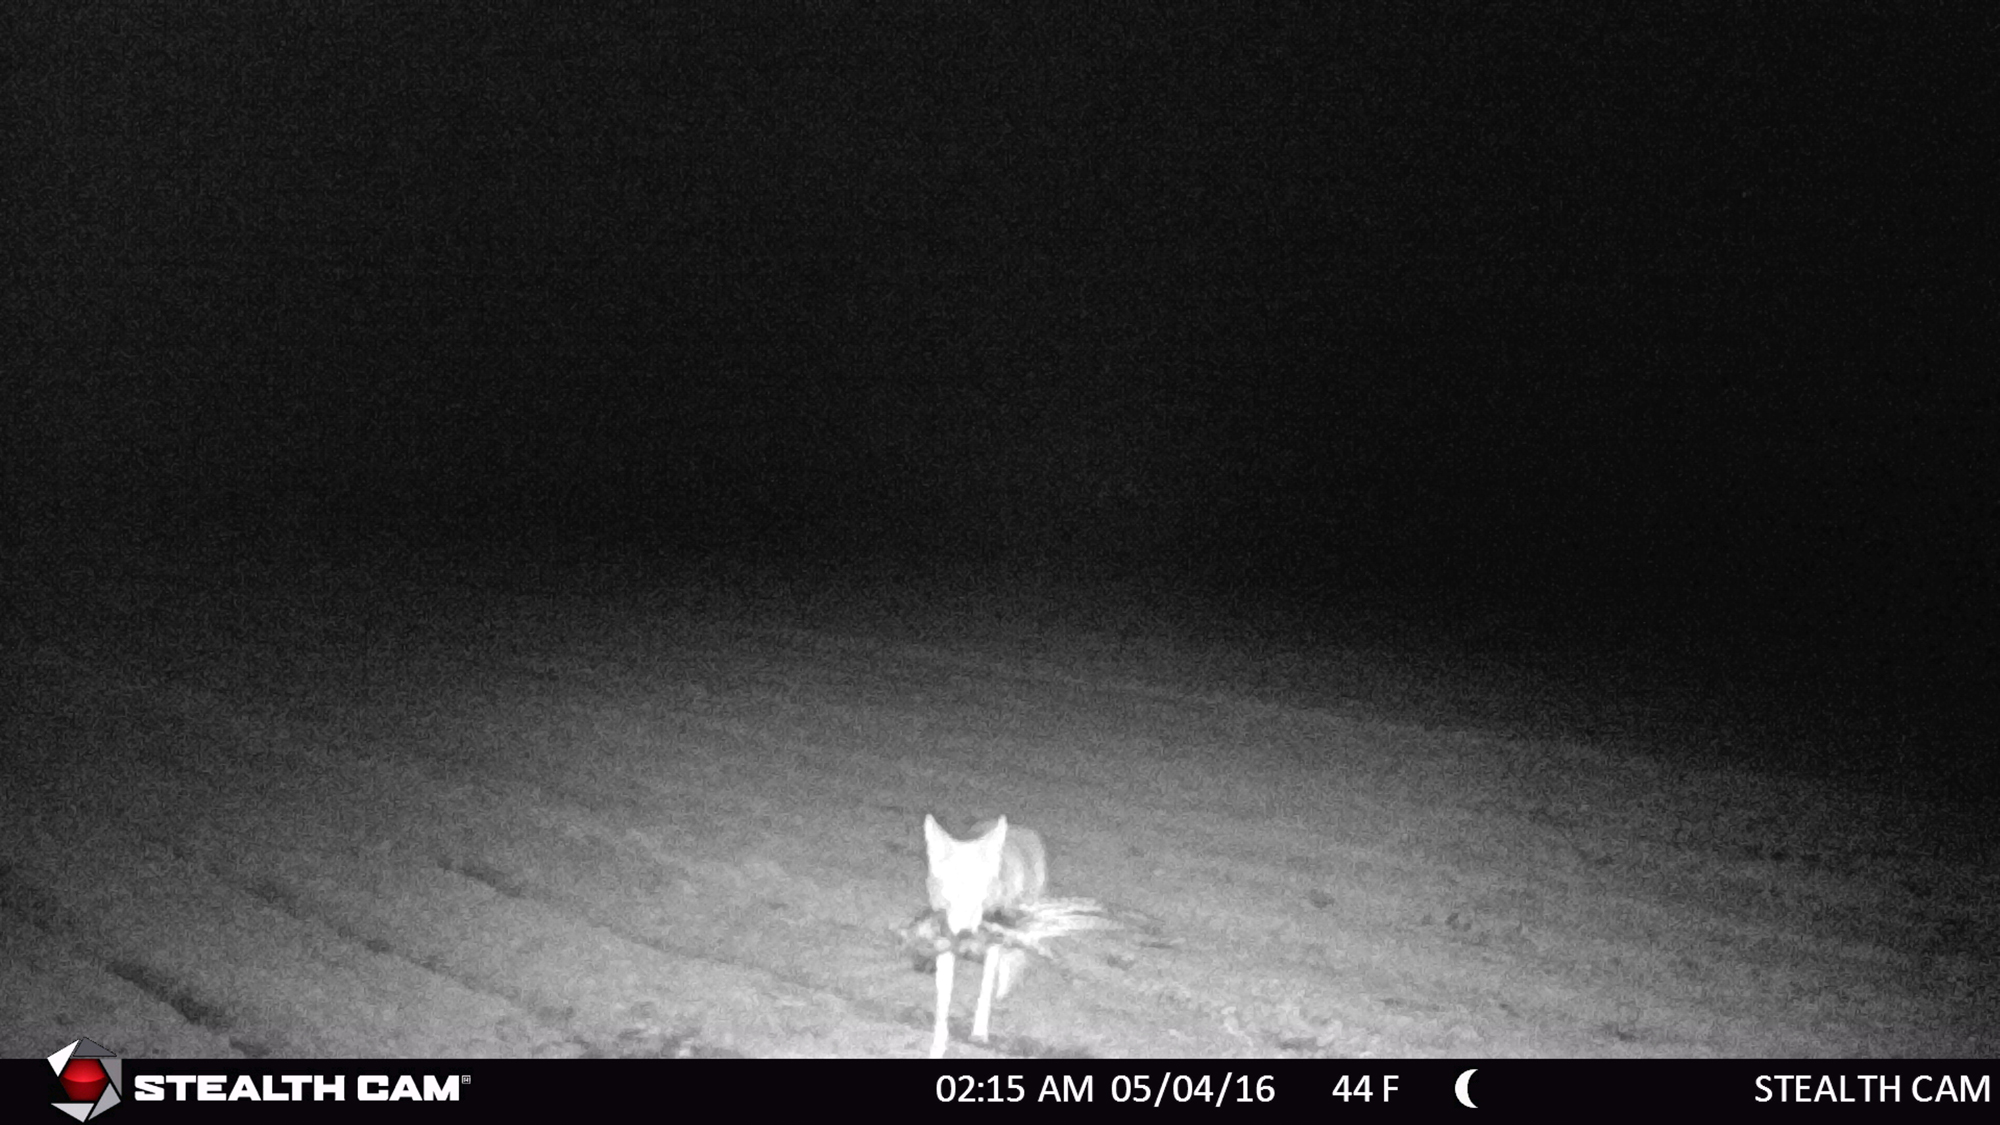 Trail camera picture of a coyote at night